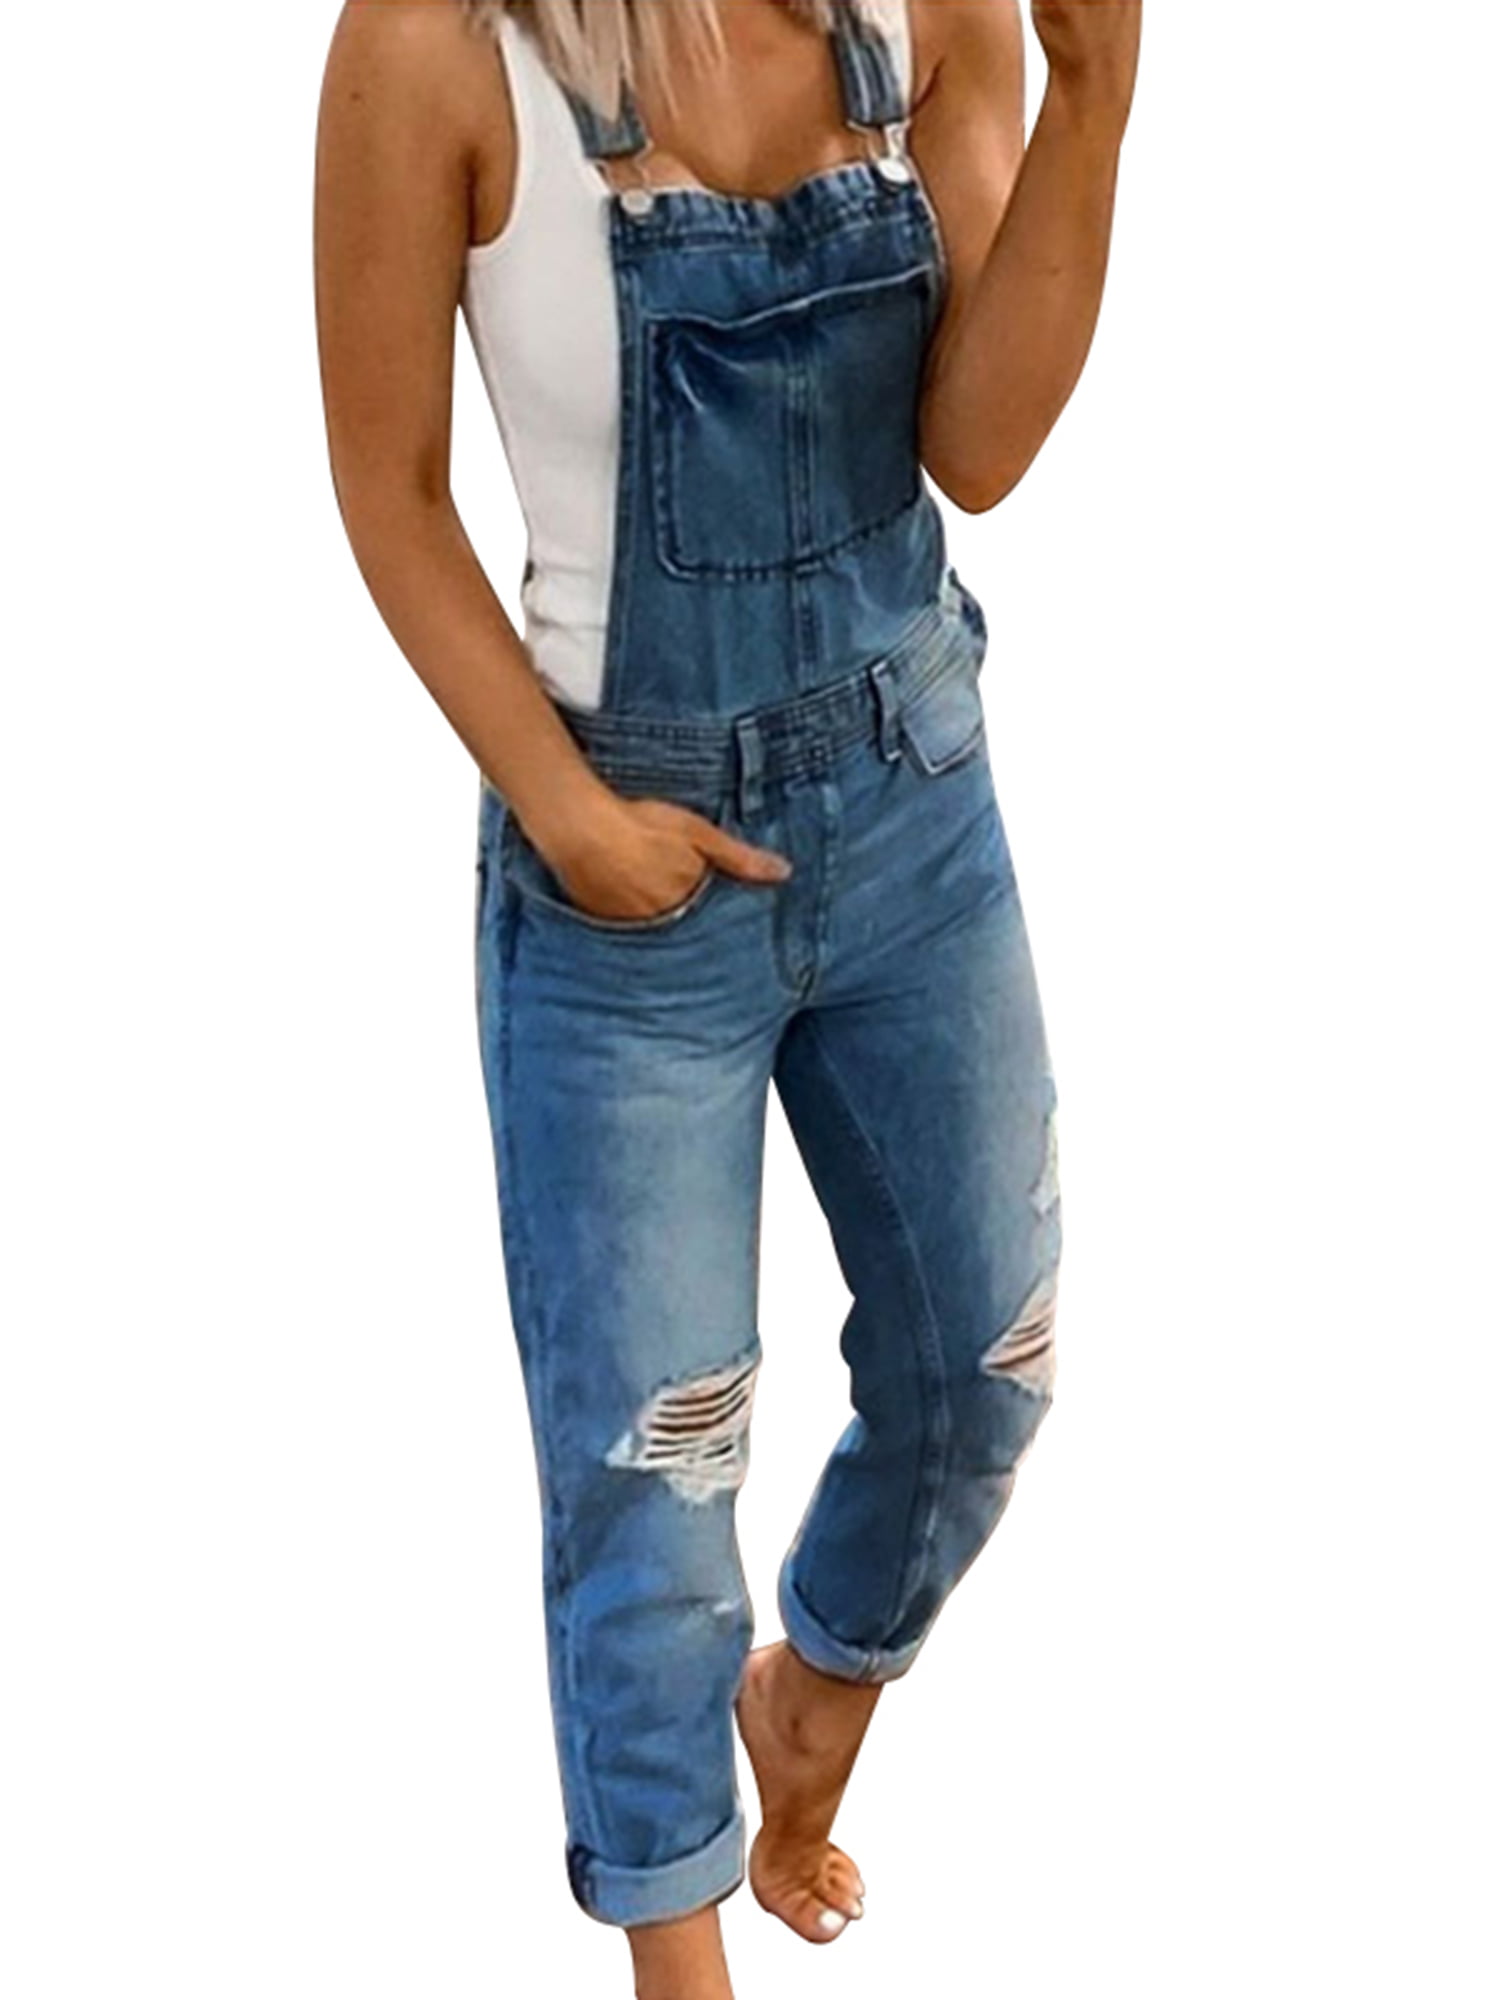 Women Skinny jeans Romper Jumpsuit Pant Destroyed Jeans Ripped Stretch Pants Rip 